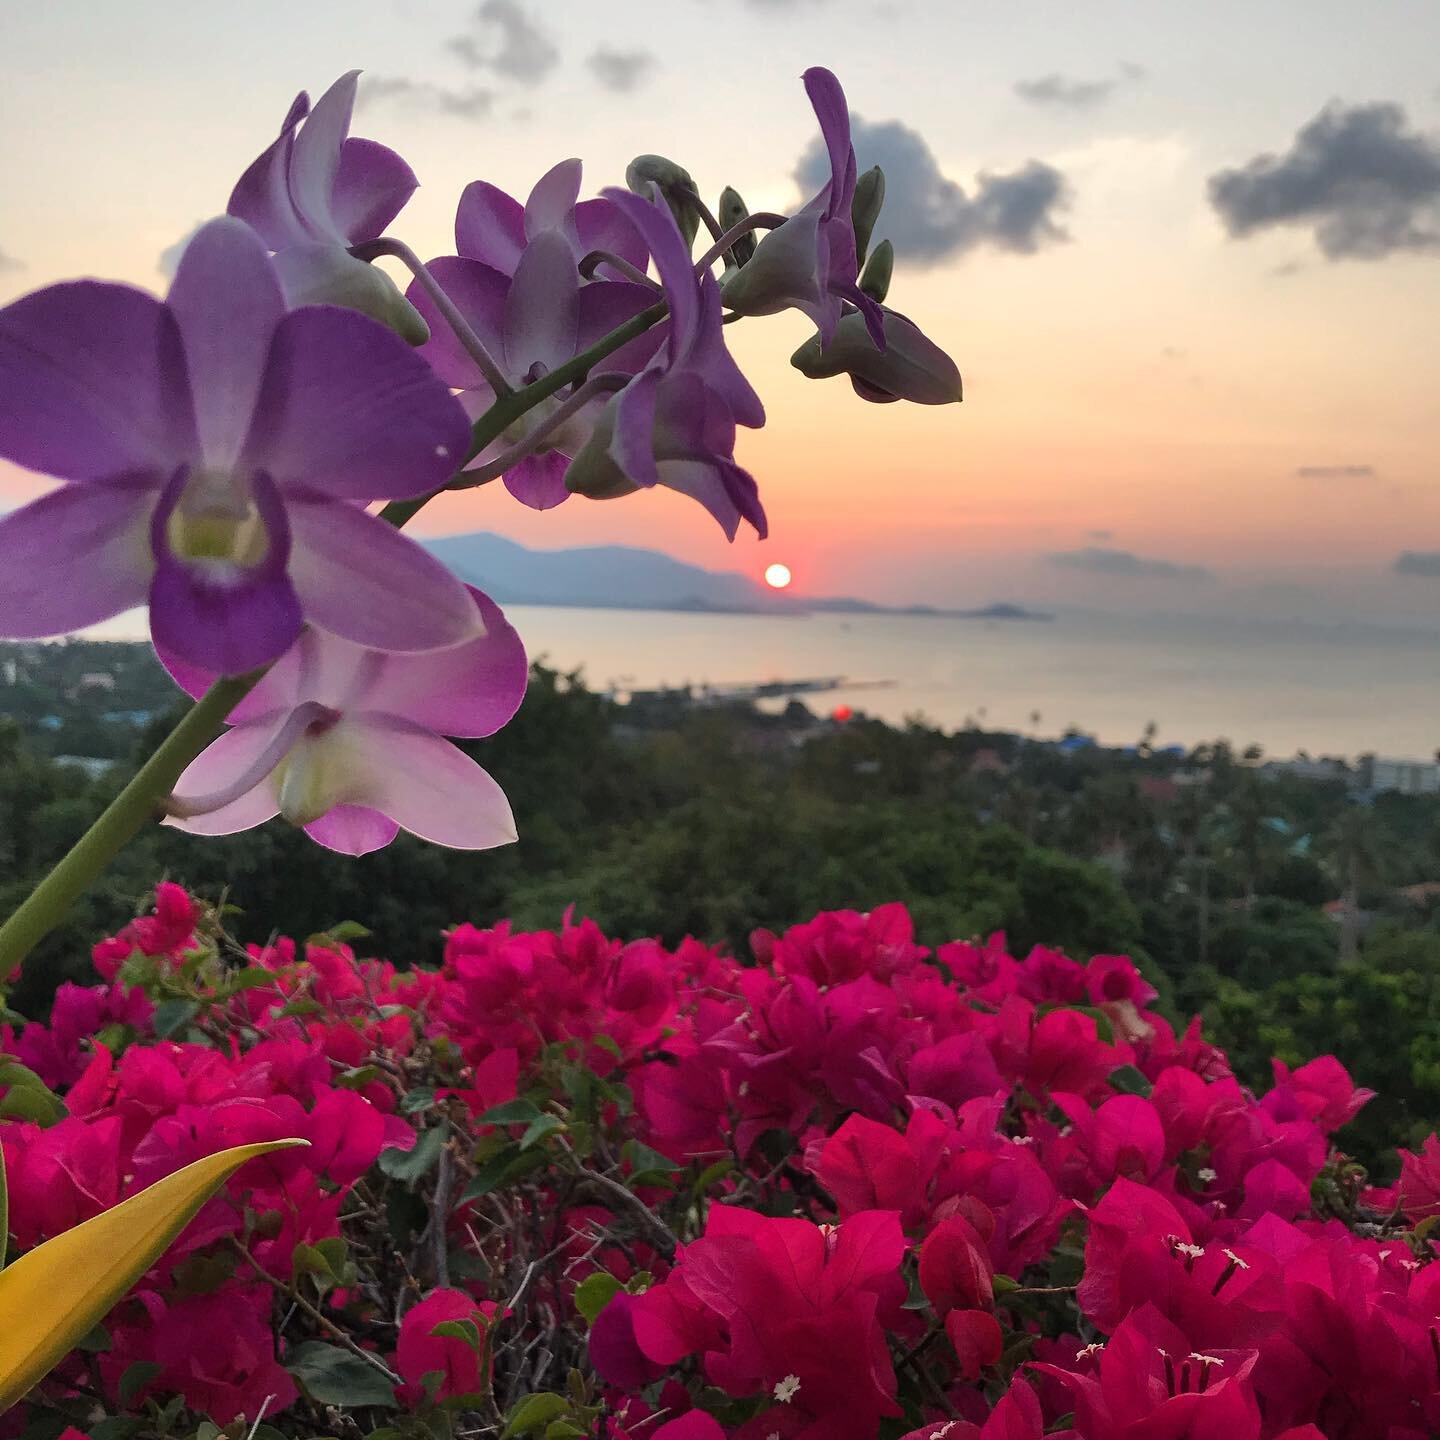 So many stunning sunsets 🌅 and so many places around the villa to sit and enjoy them. Throw in some orchids and bougainvillea in full bloom (maybe a cocktail 🍹too) and you have achieved vacation perfection. .
.
.
.
.
#baanchuddanip #samuivilla #sun